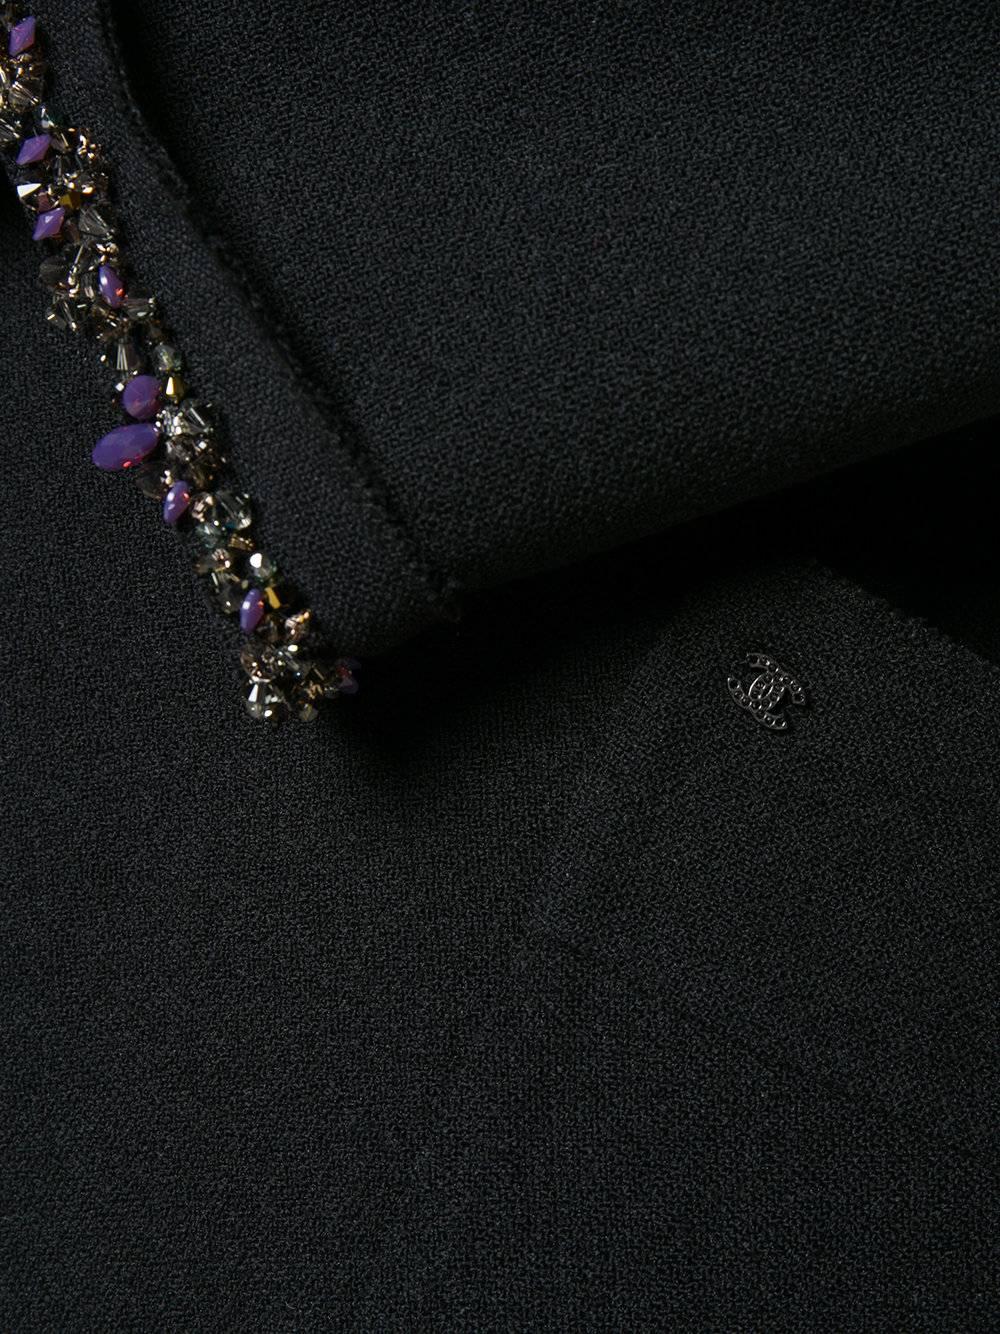 This Chanel coat was crafted from a black wool blend. The exquisite purple, silver and black beaded edging add a sophisticated feminine look to this piece. This is complemented by a band collar with a pussy bow detail to the front, no fastening,